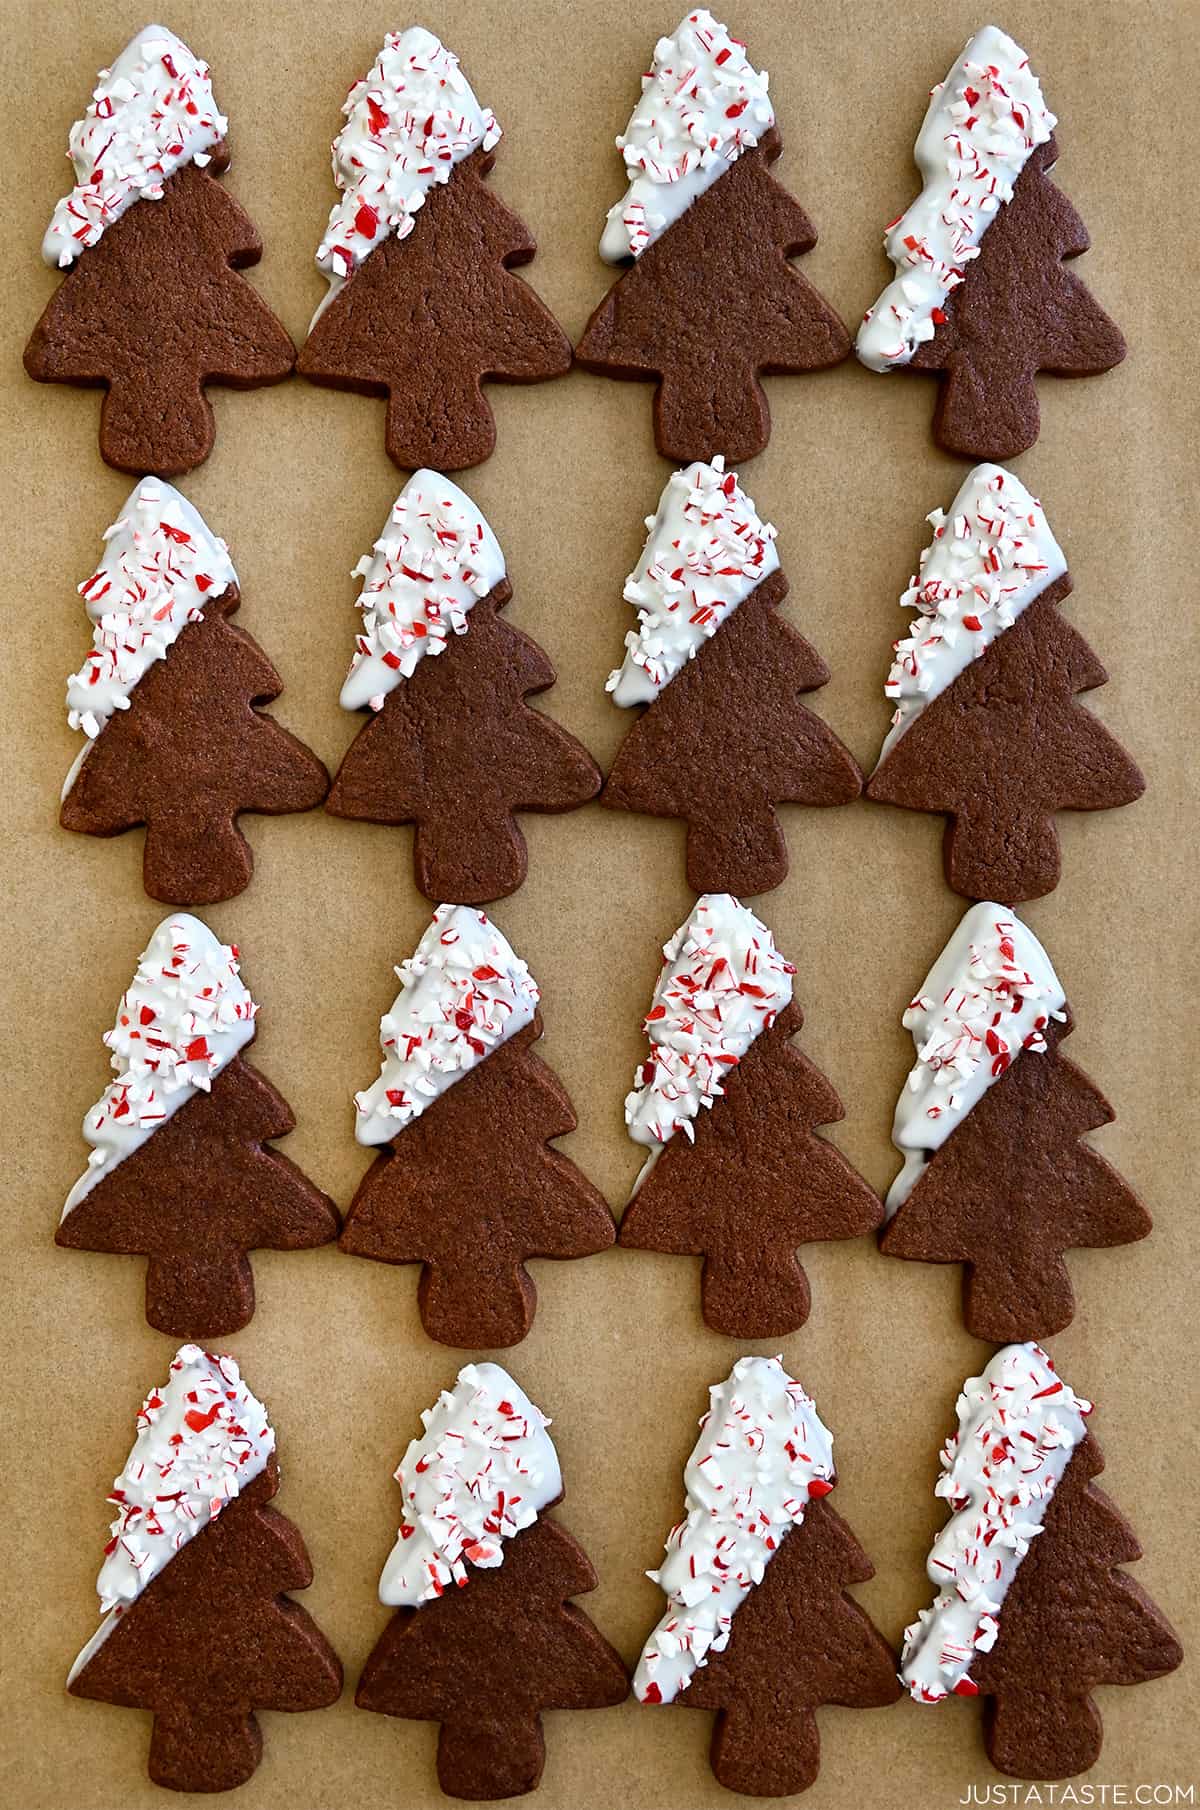 Chocolate sugar cookies in the shapes of Christmas trees dipped in white chocolate and sprinkled with crushed candy canes.